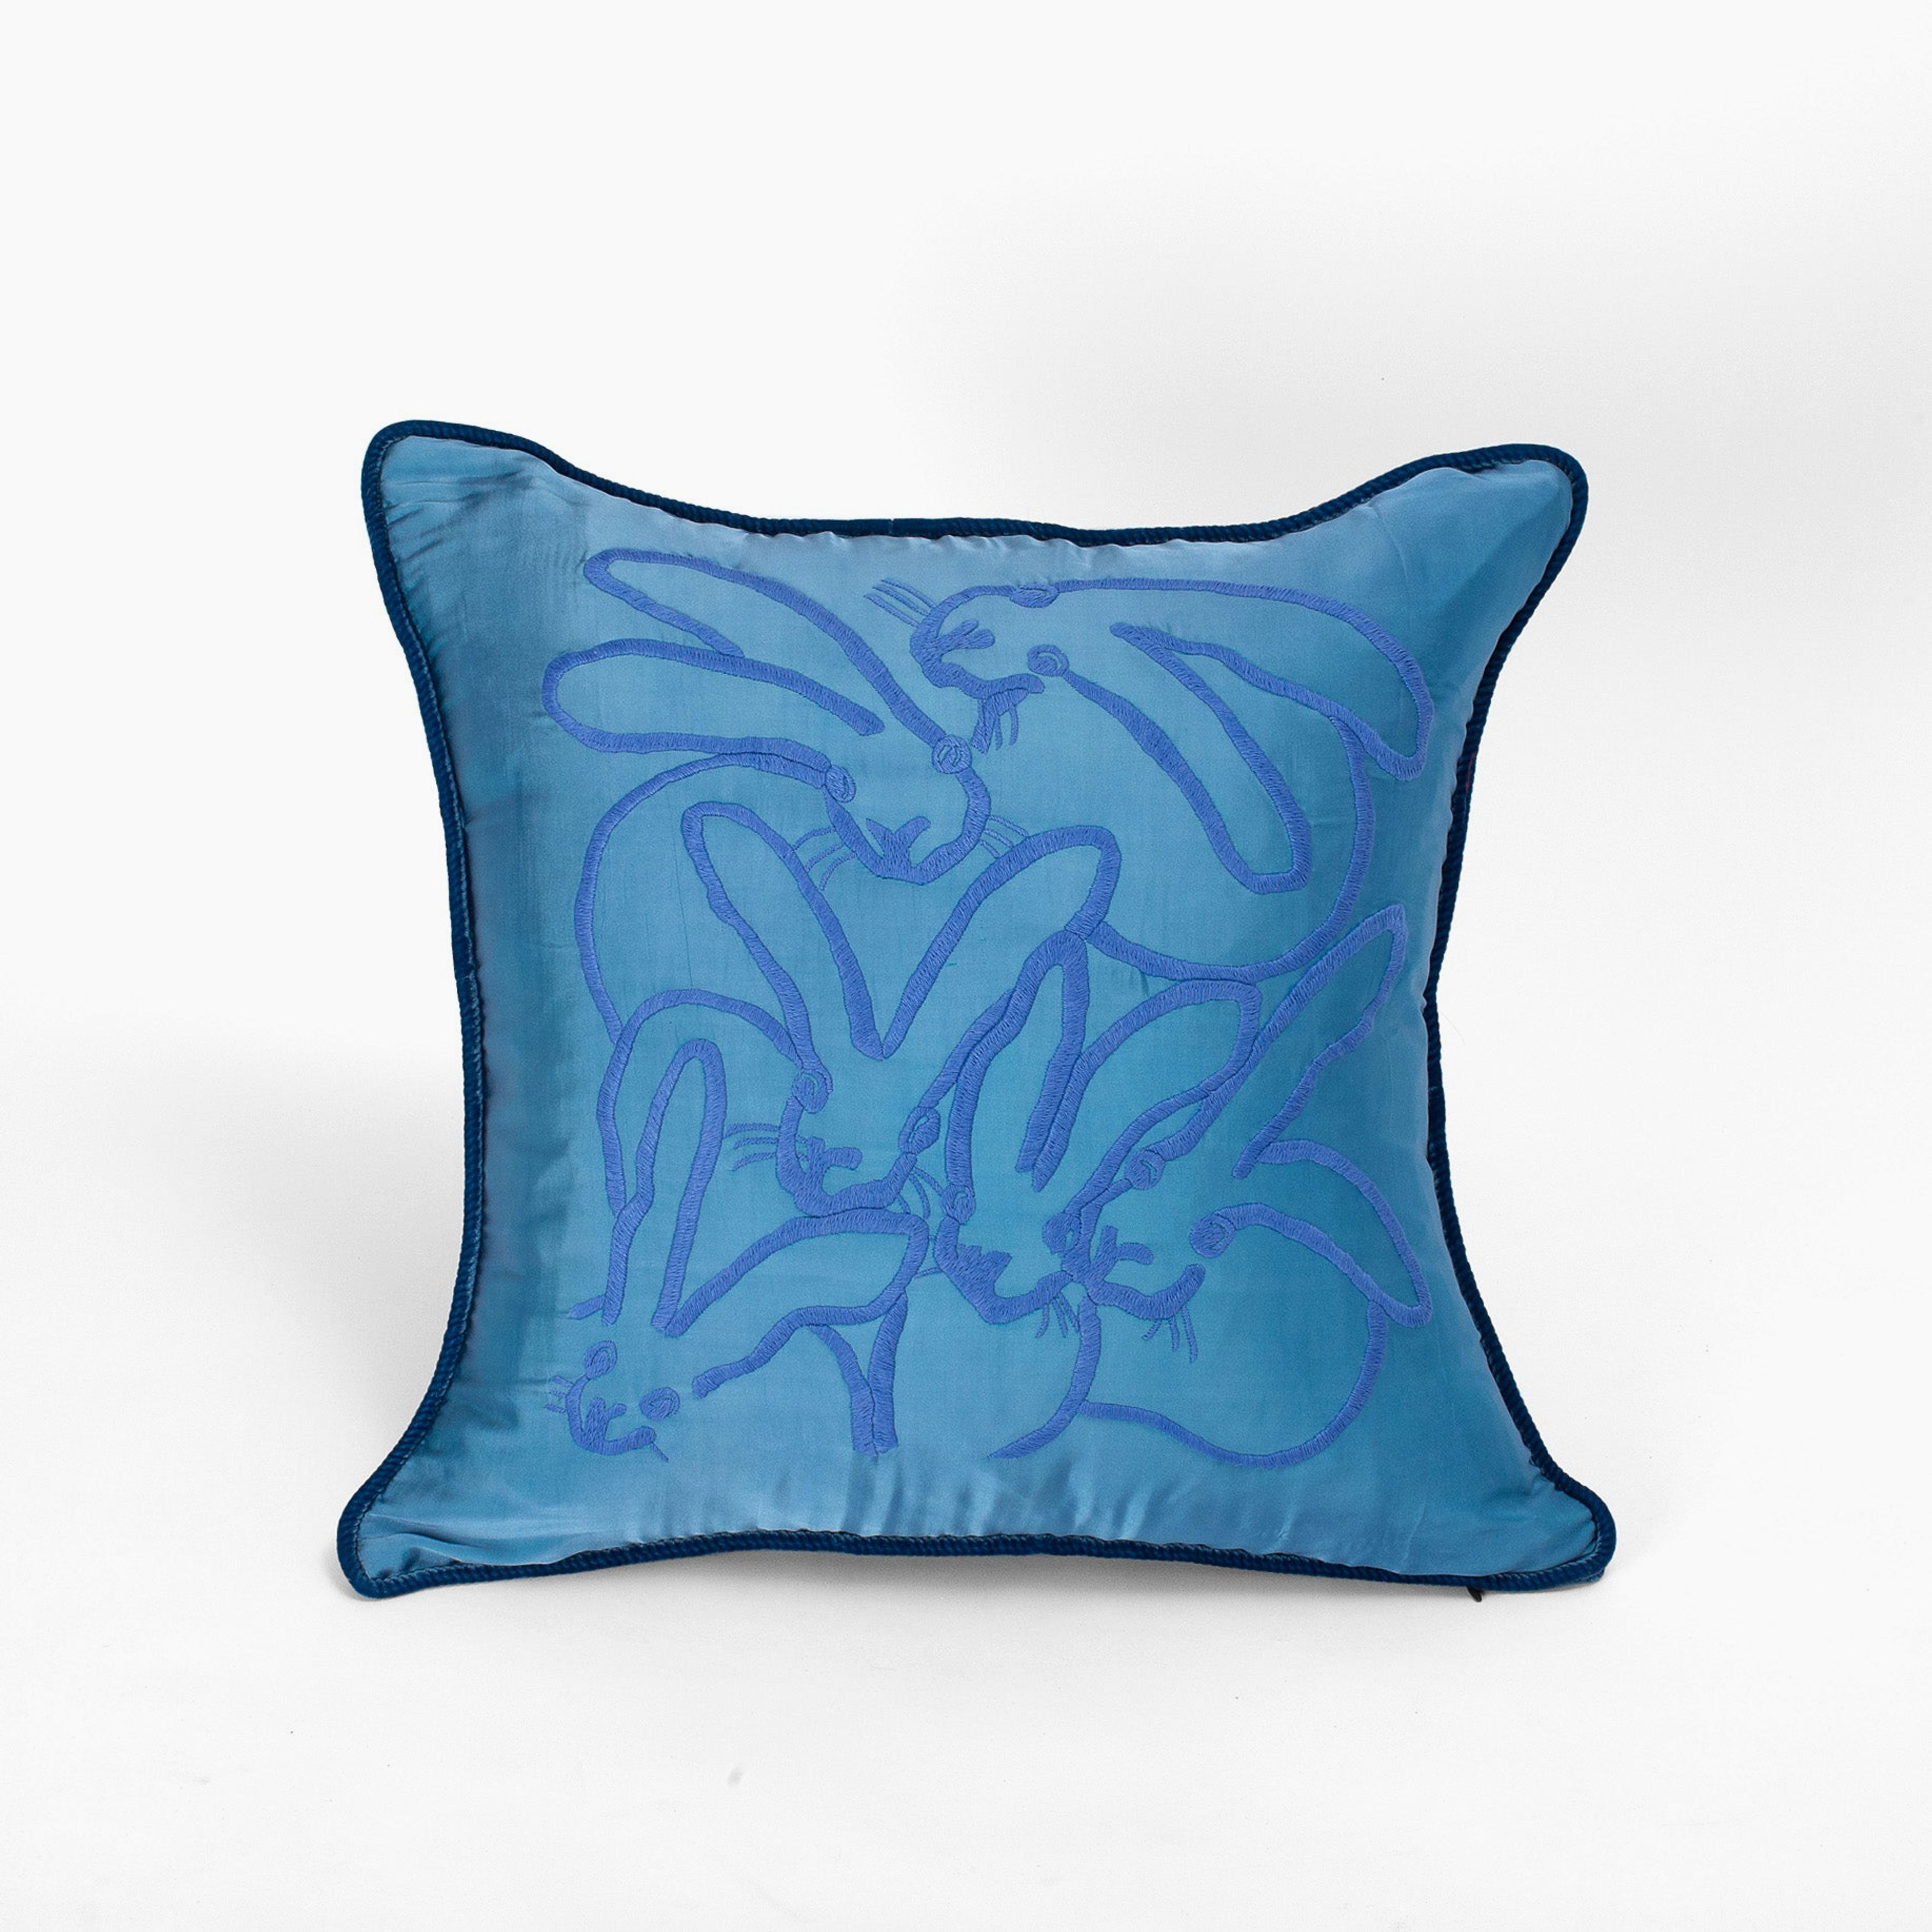 Hand Embroidered Silk & Velvet Bunny Pillow, French Blue, 22 x 22